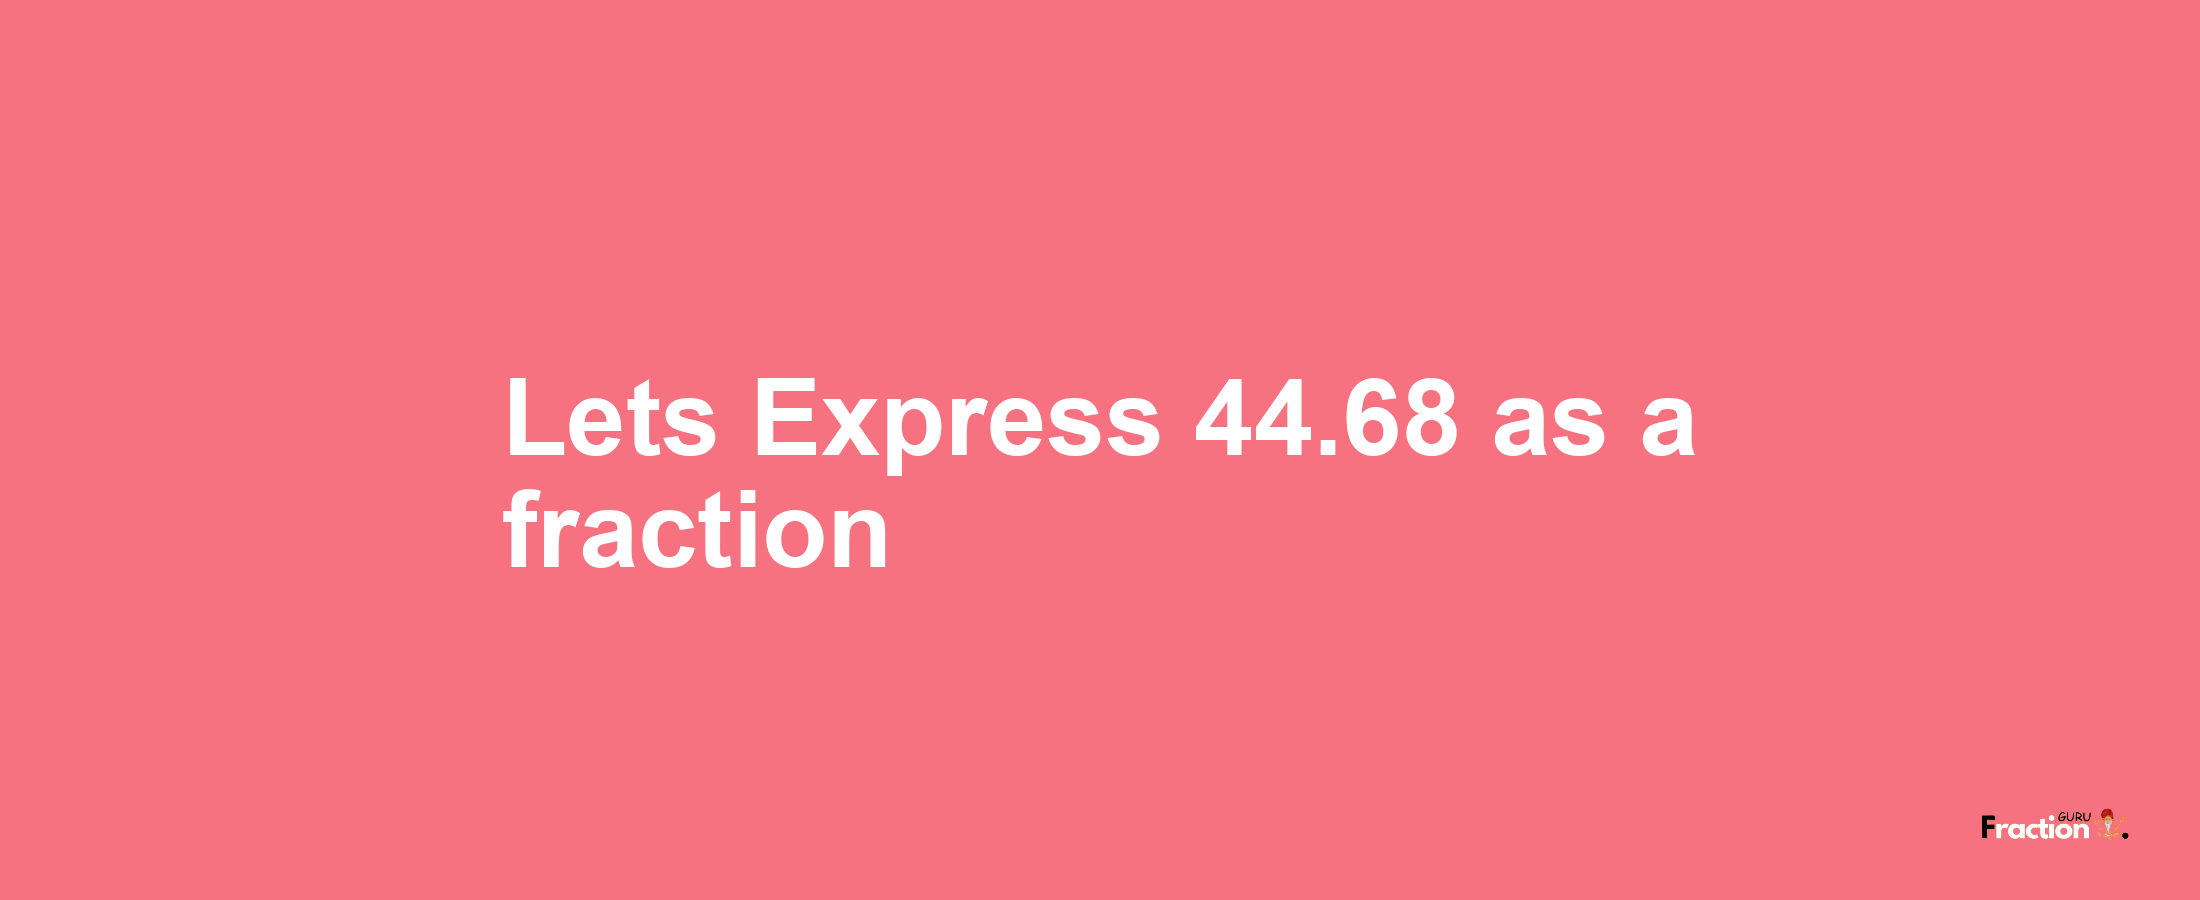 Lets Express 44.68 as afraction